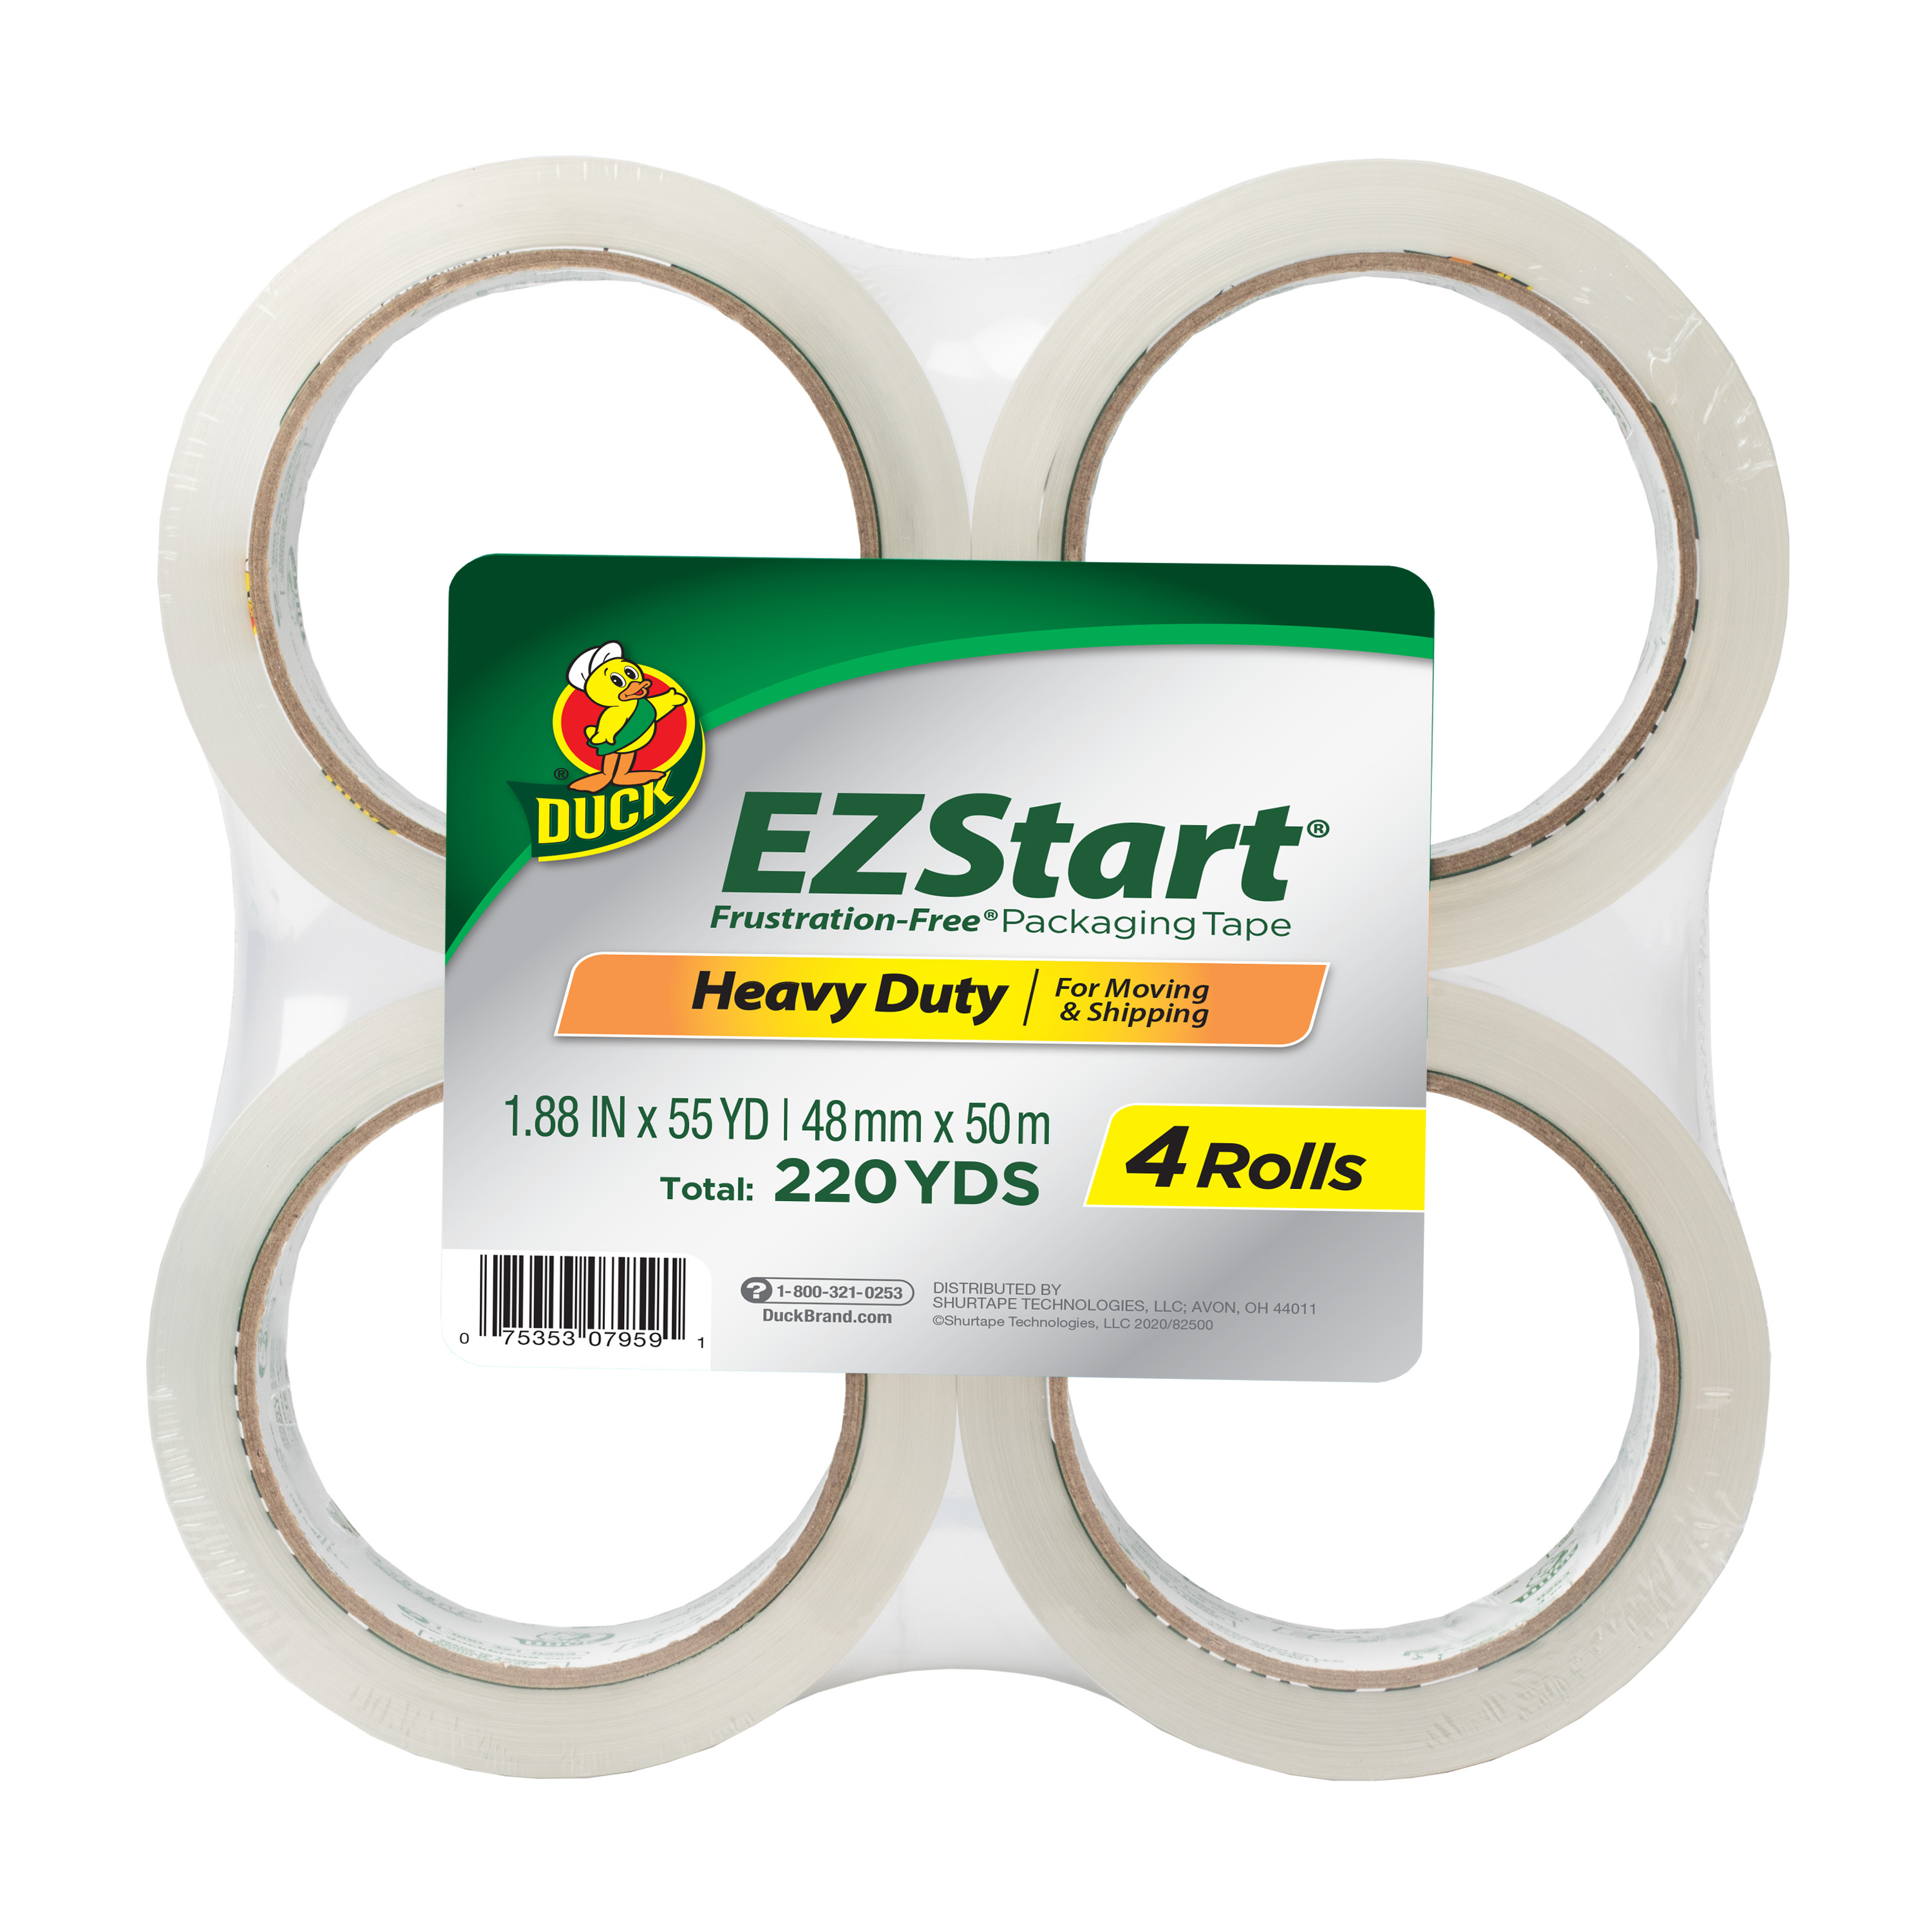 Duck EZ Start Clear Acrylic Packaging Tape, 1.88 in. x 54.6 yd., 4 Pack - image 1 of 11